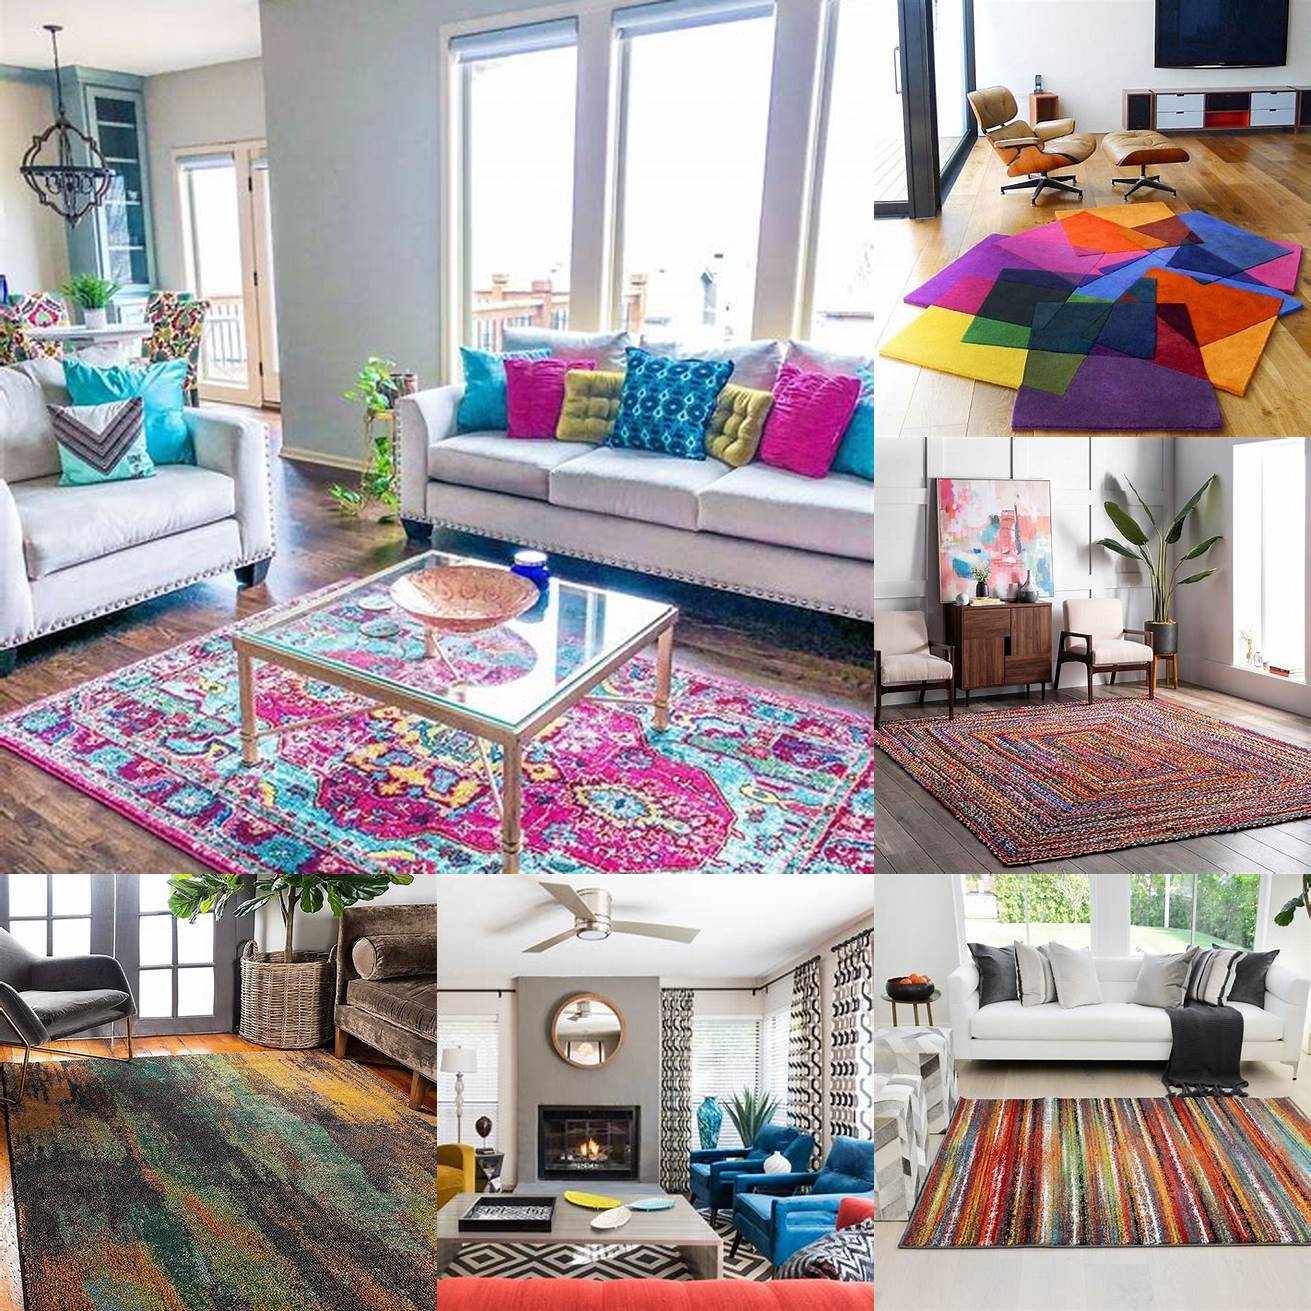 3 Add a pop of color with an area rug